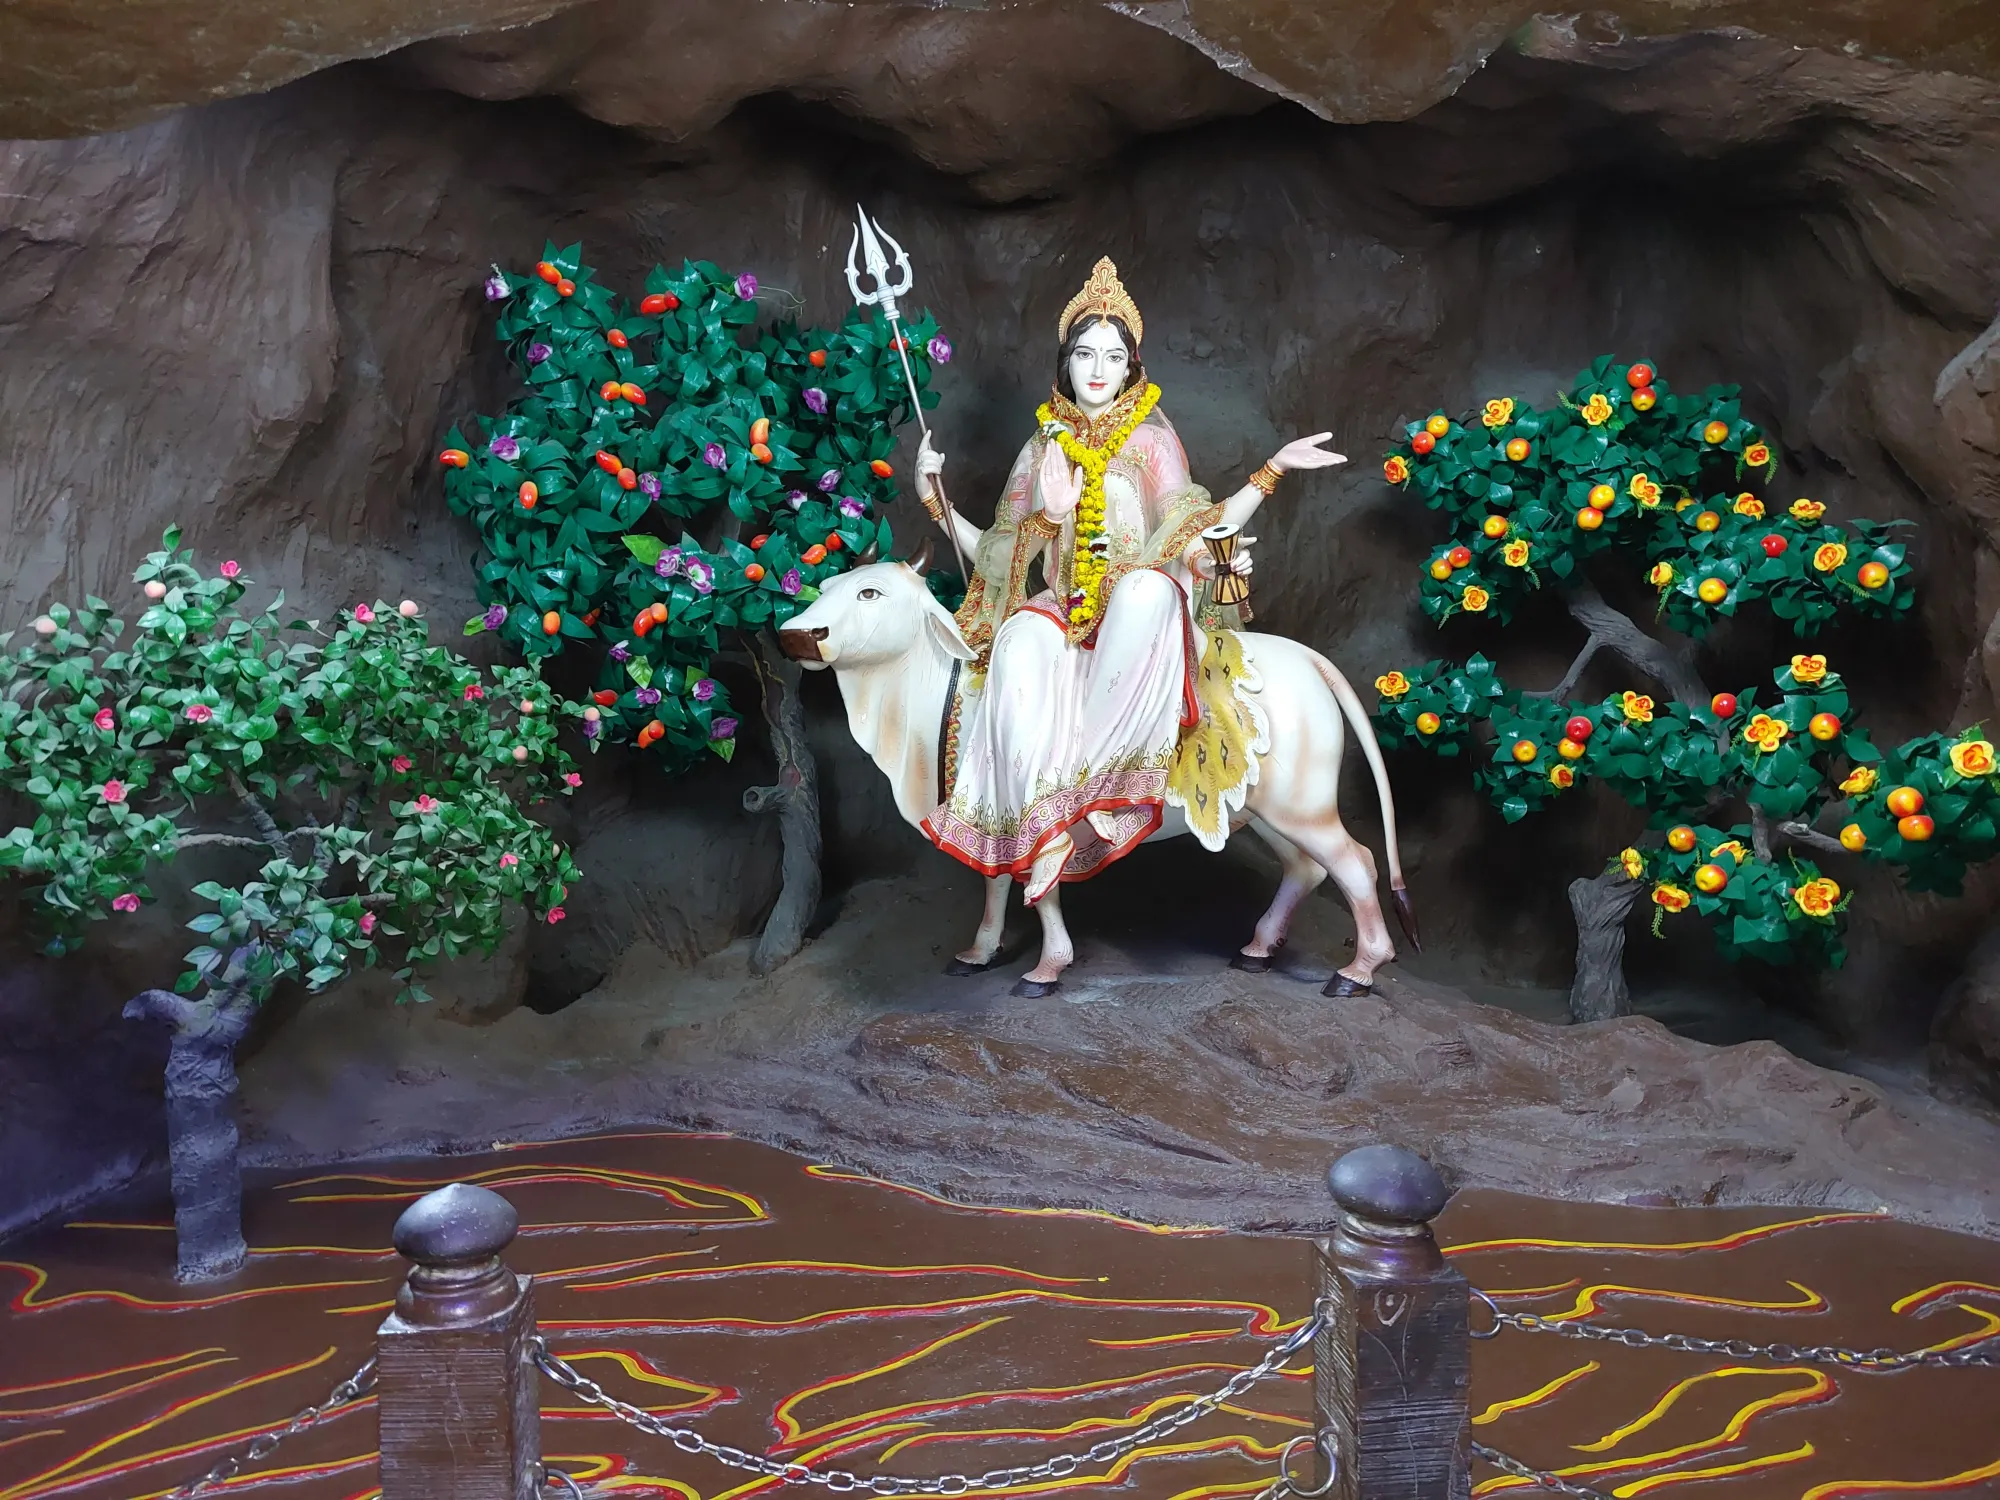 Goddess Mahagauri is the eighth form of Goddess Durga and is worshipped on the eighth day of Navratri, known as Ashtami